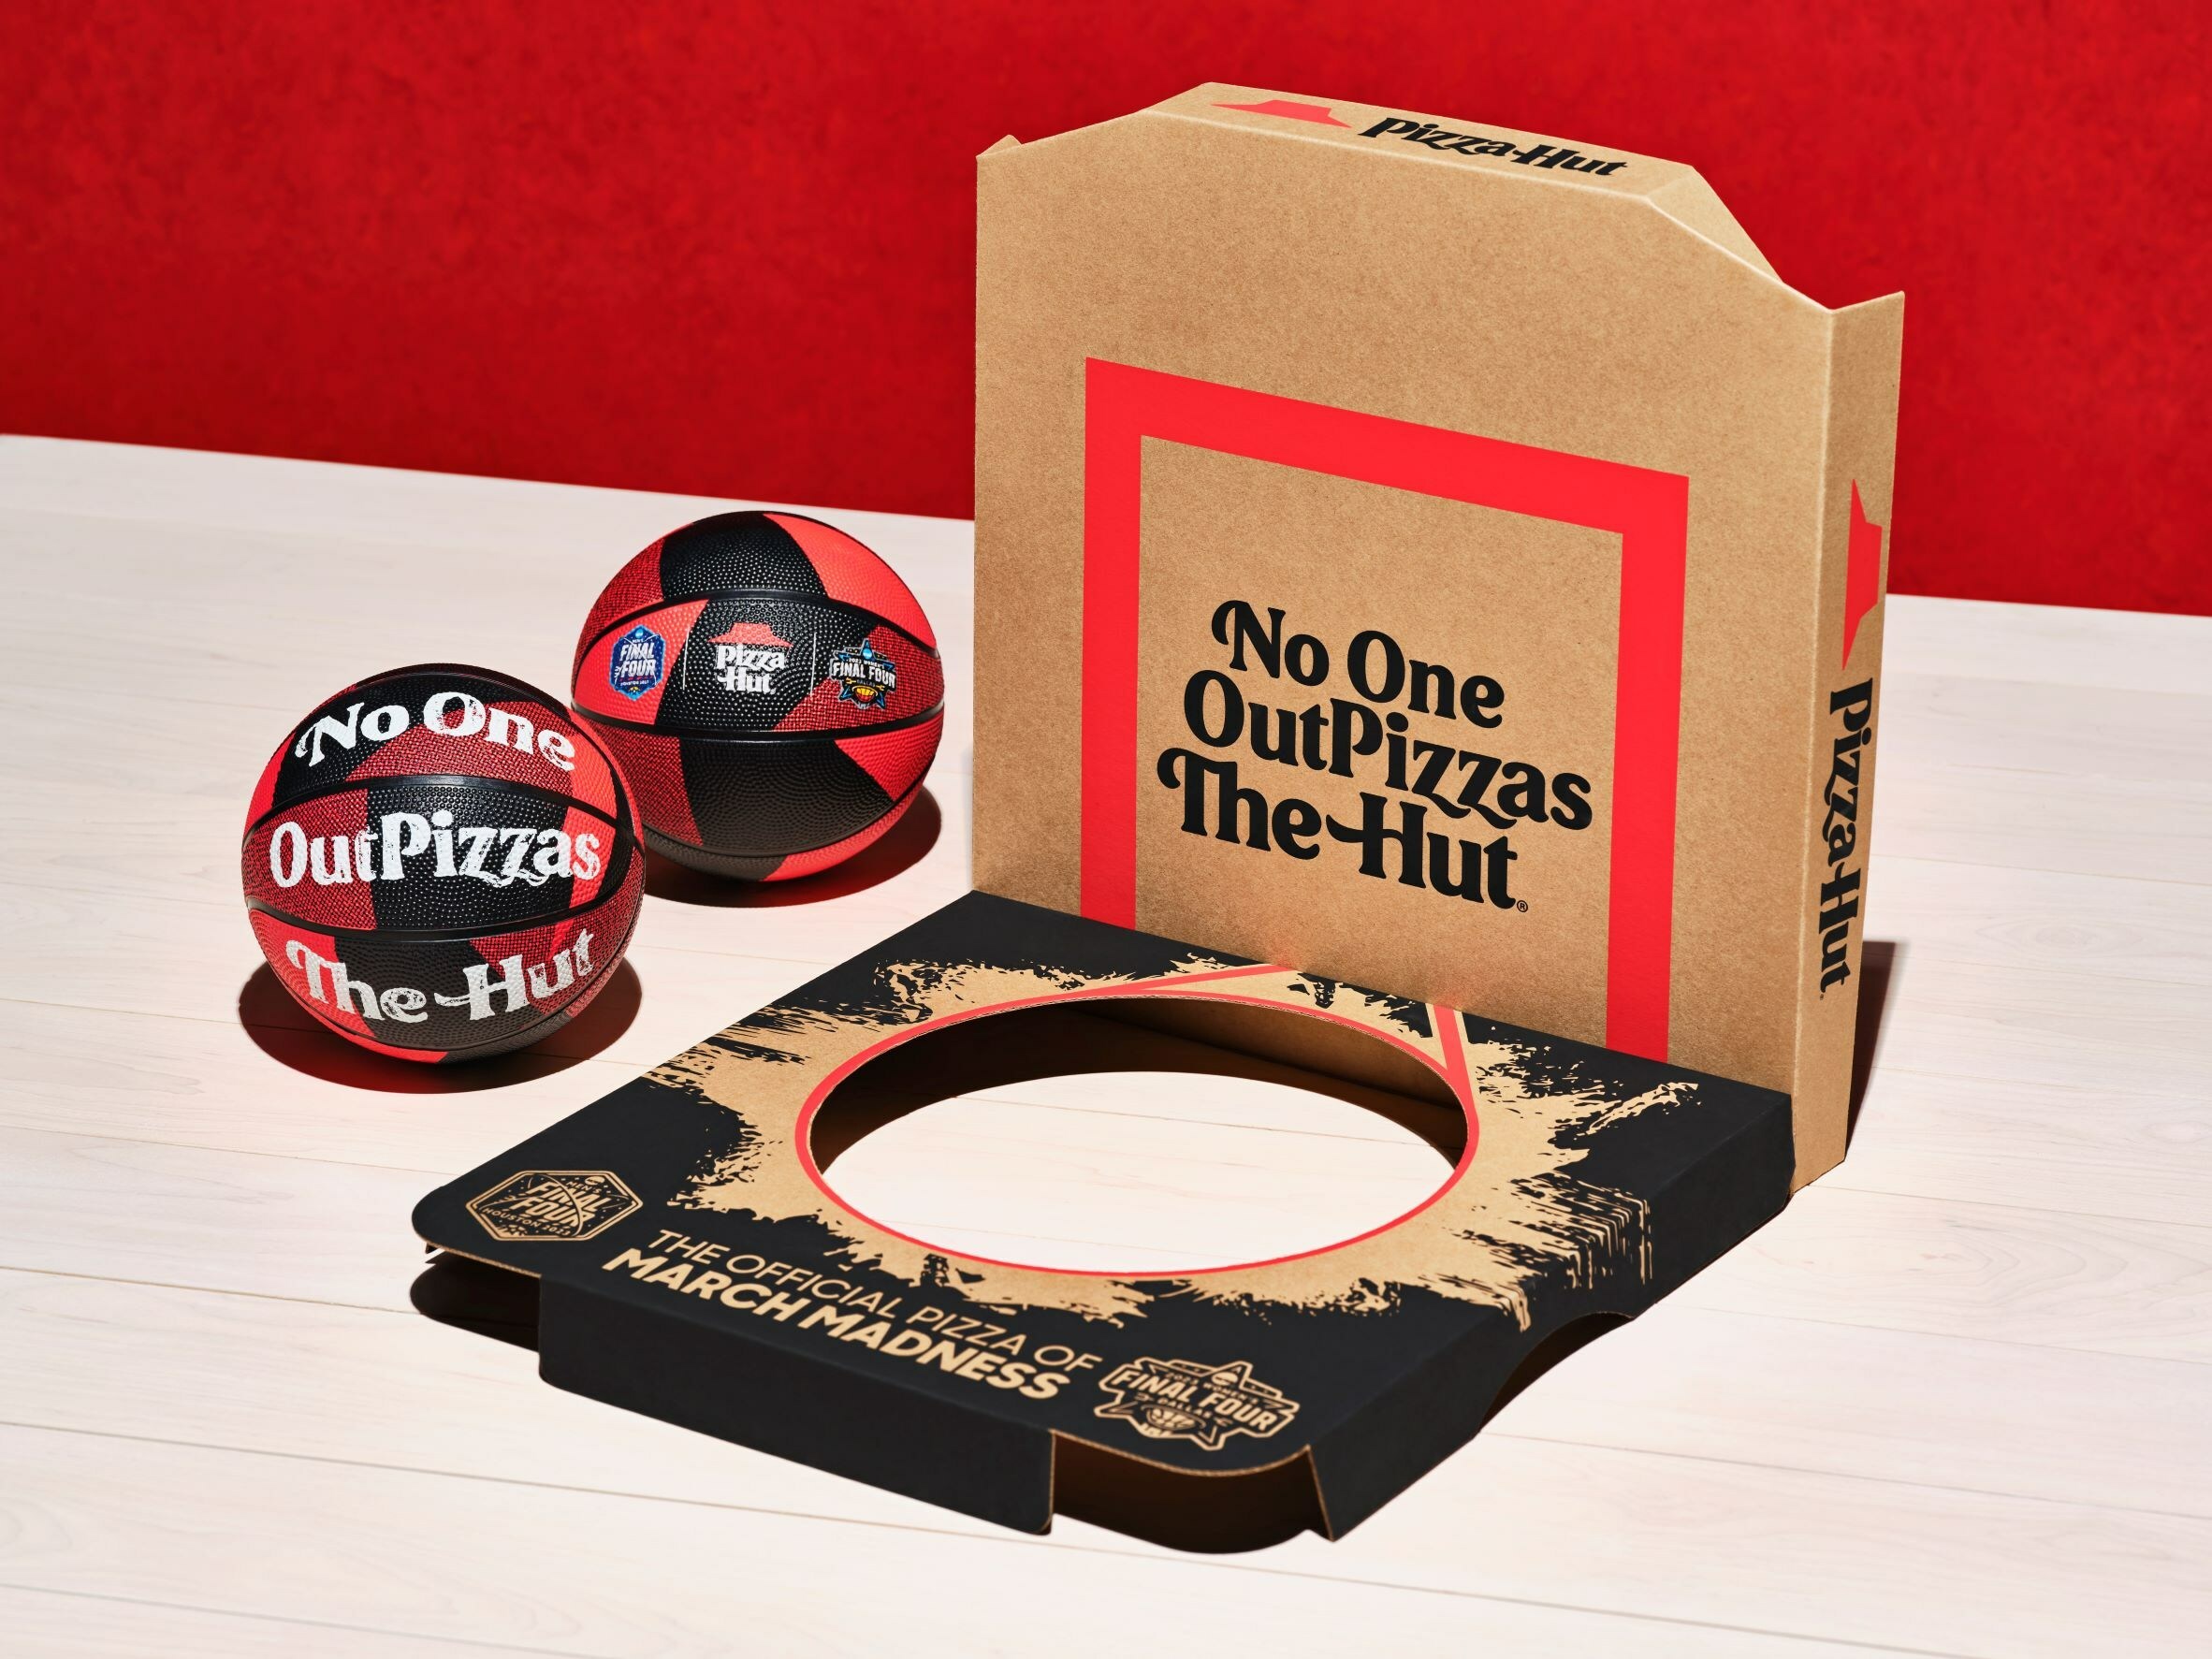 Pizza-hut-limited-edition